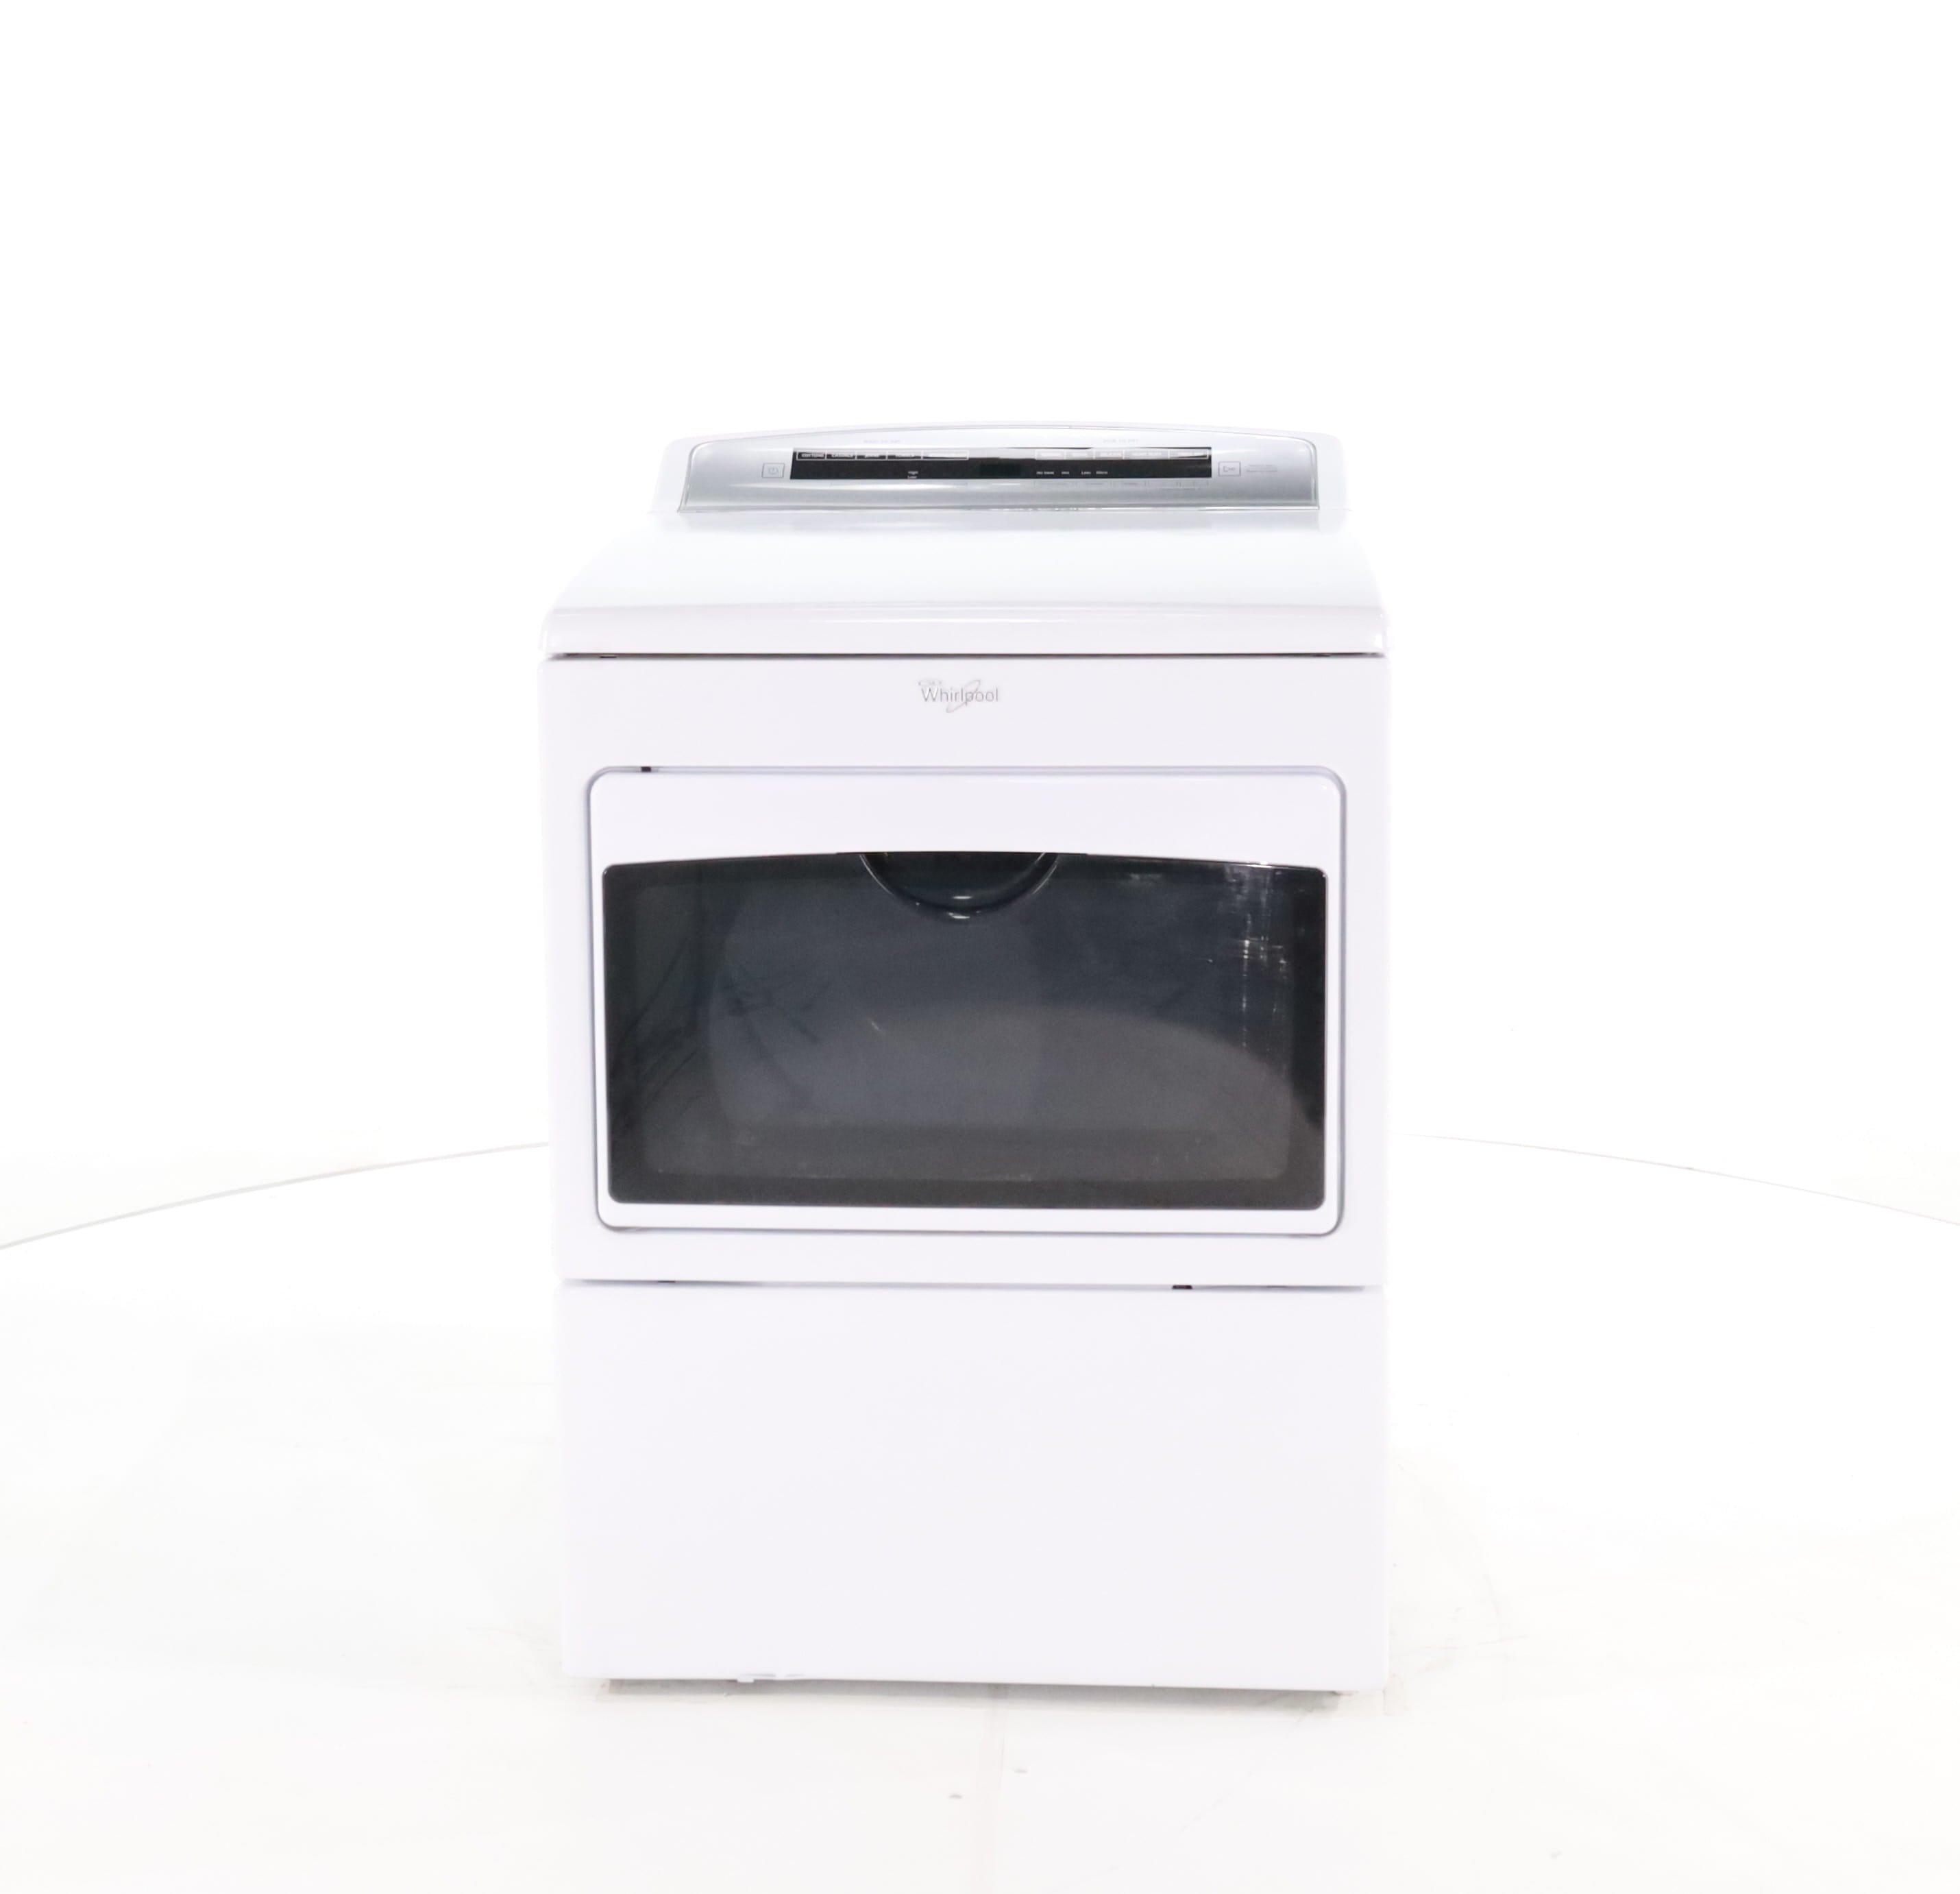 Pictures of Whirlpool 7.4 cu. ft. Electric Dryer with Hamper Door- Certified Refurbished - Neu Appliance Outlet - Discount Appliance Outlet in Austin, Tx